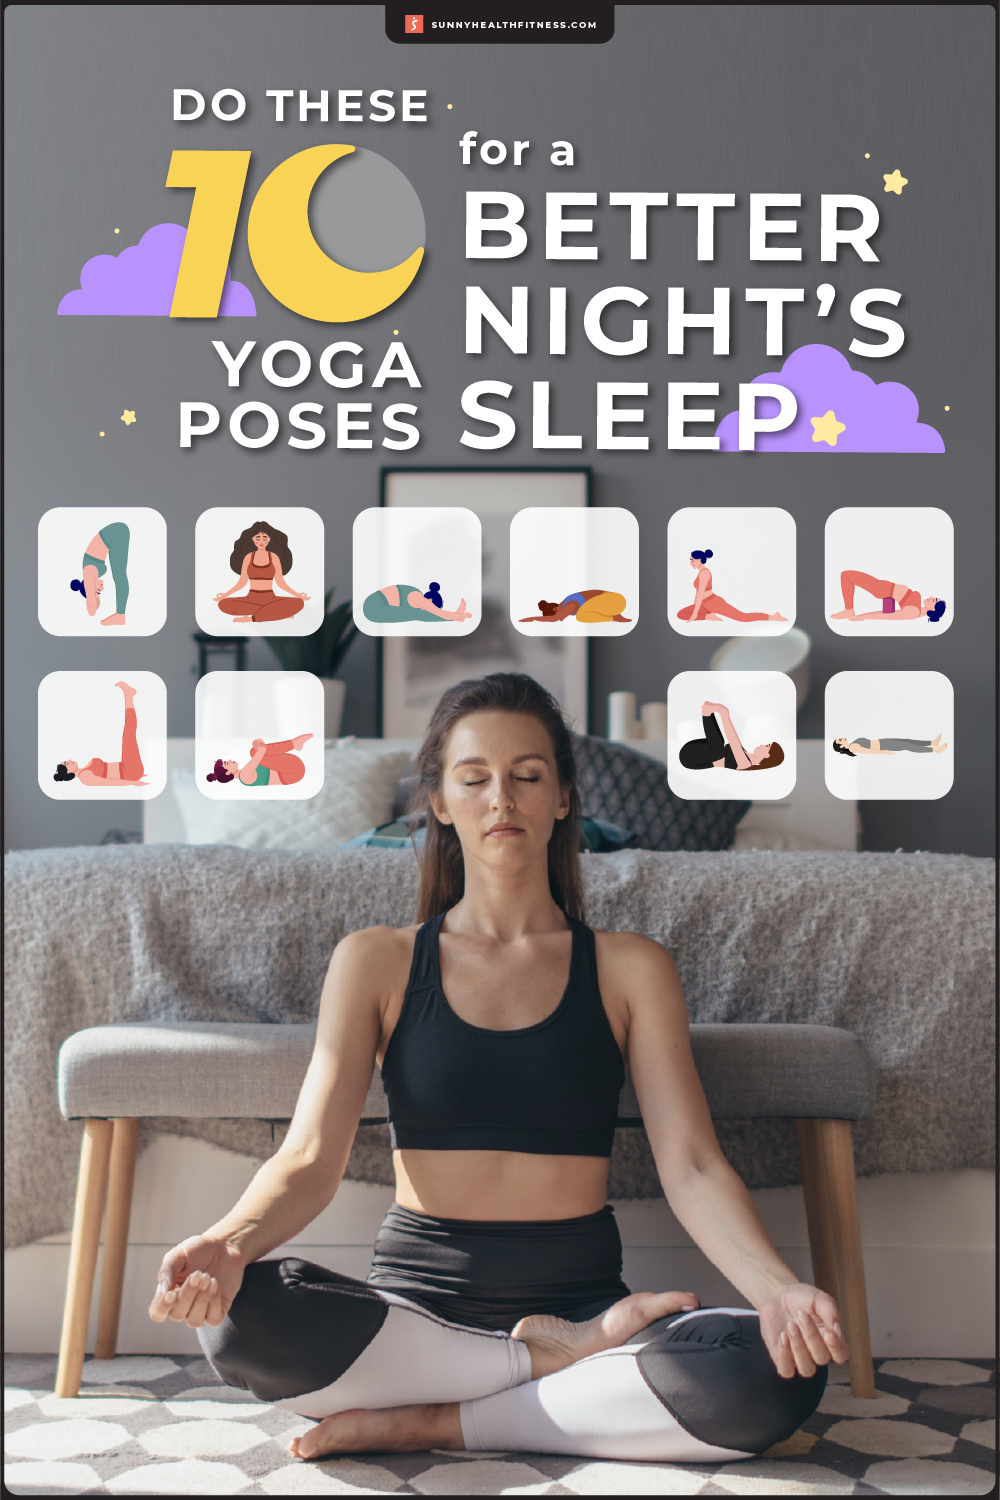 Don't Miss 16 Yoga Poses That Improve Your Sleep | by Yoga Share | Medium